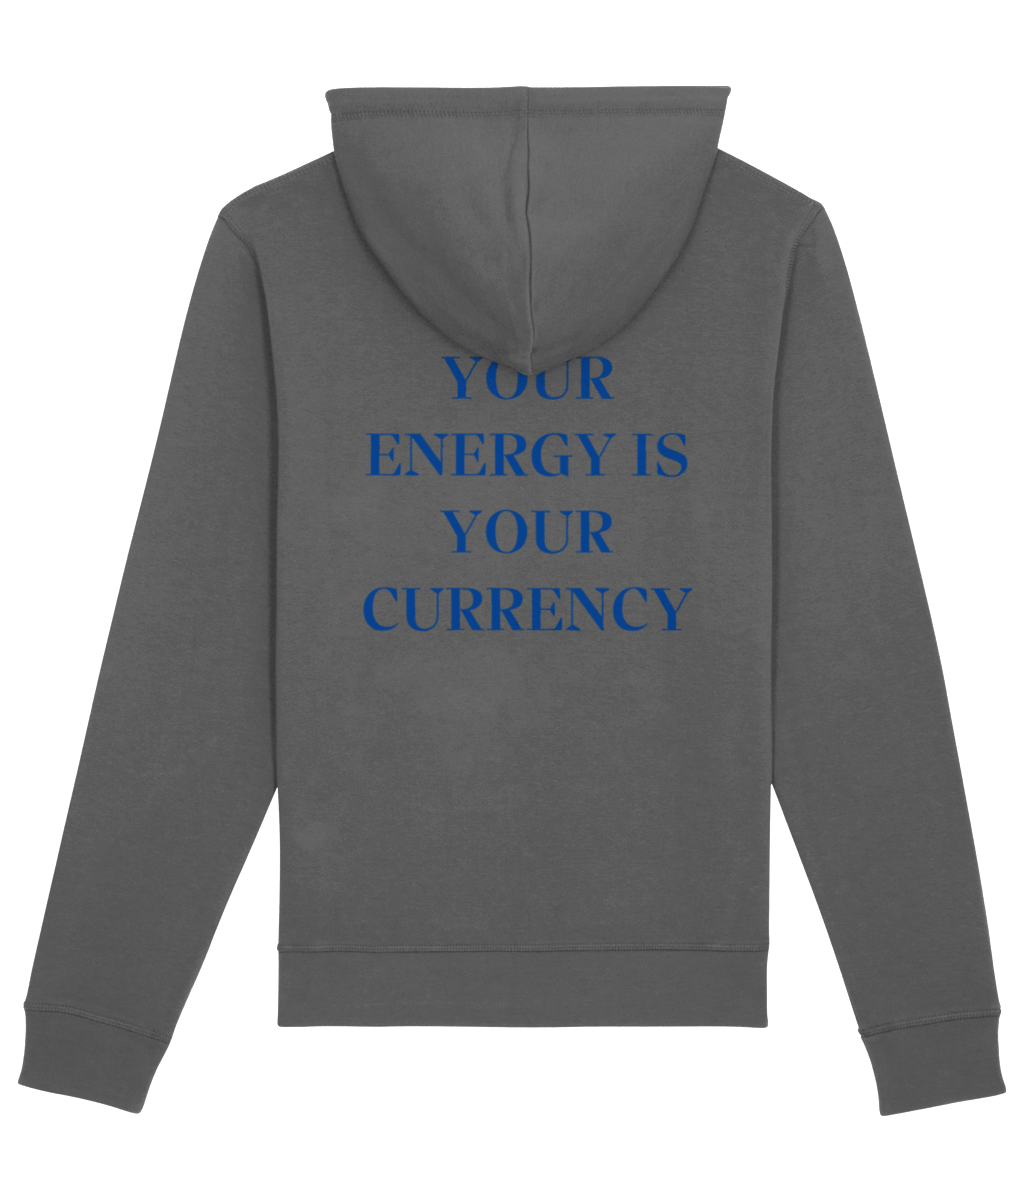 YOUR ENERGY IS YOUR CURRENCY HOODIE